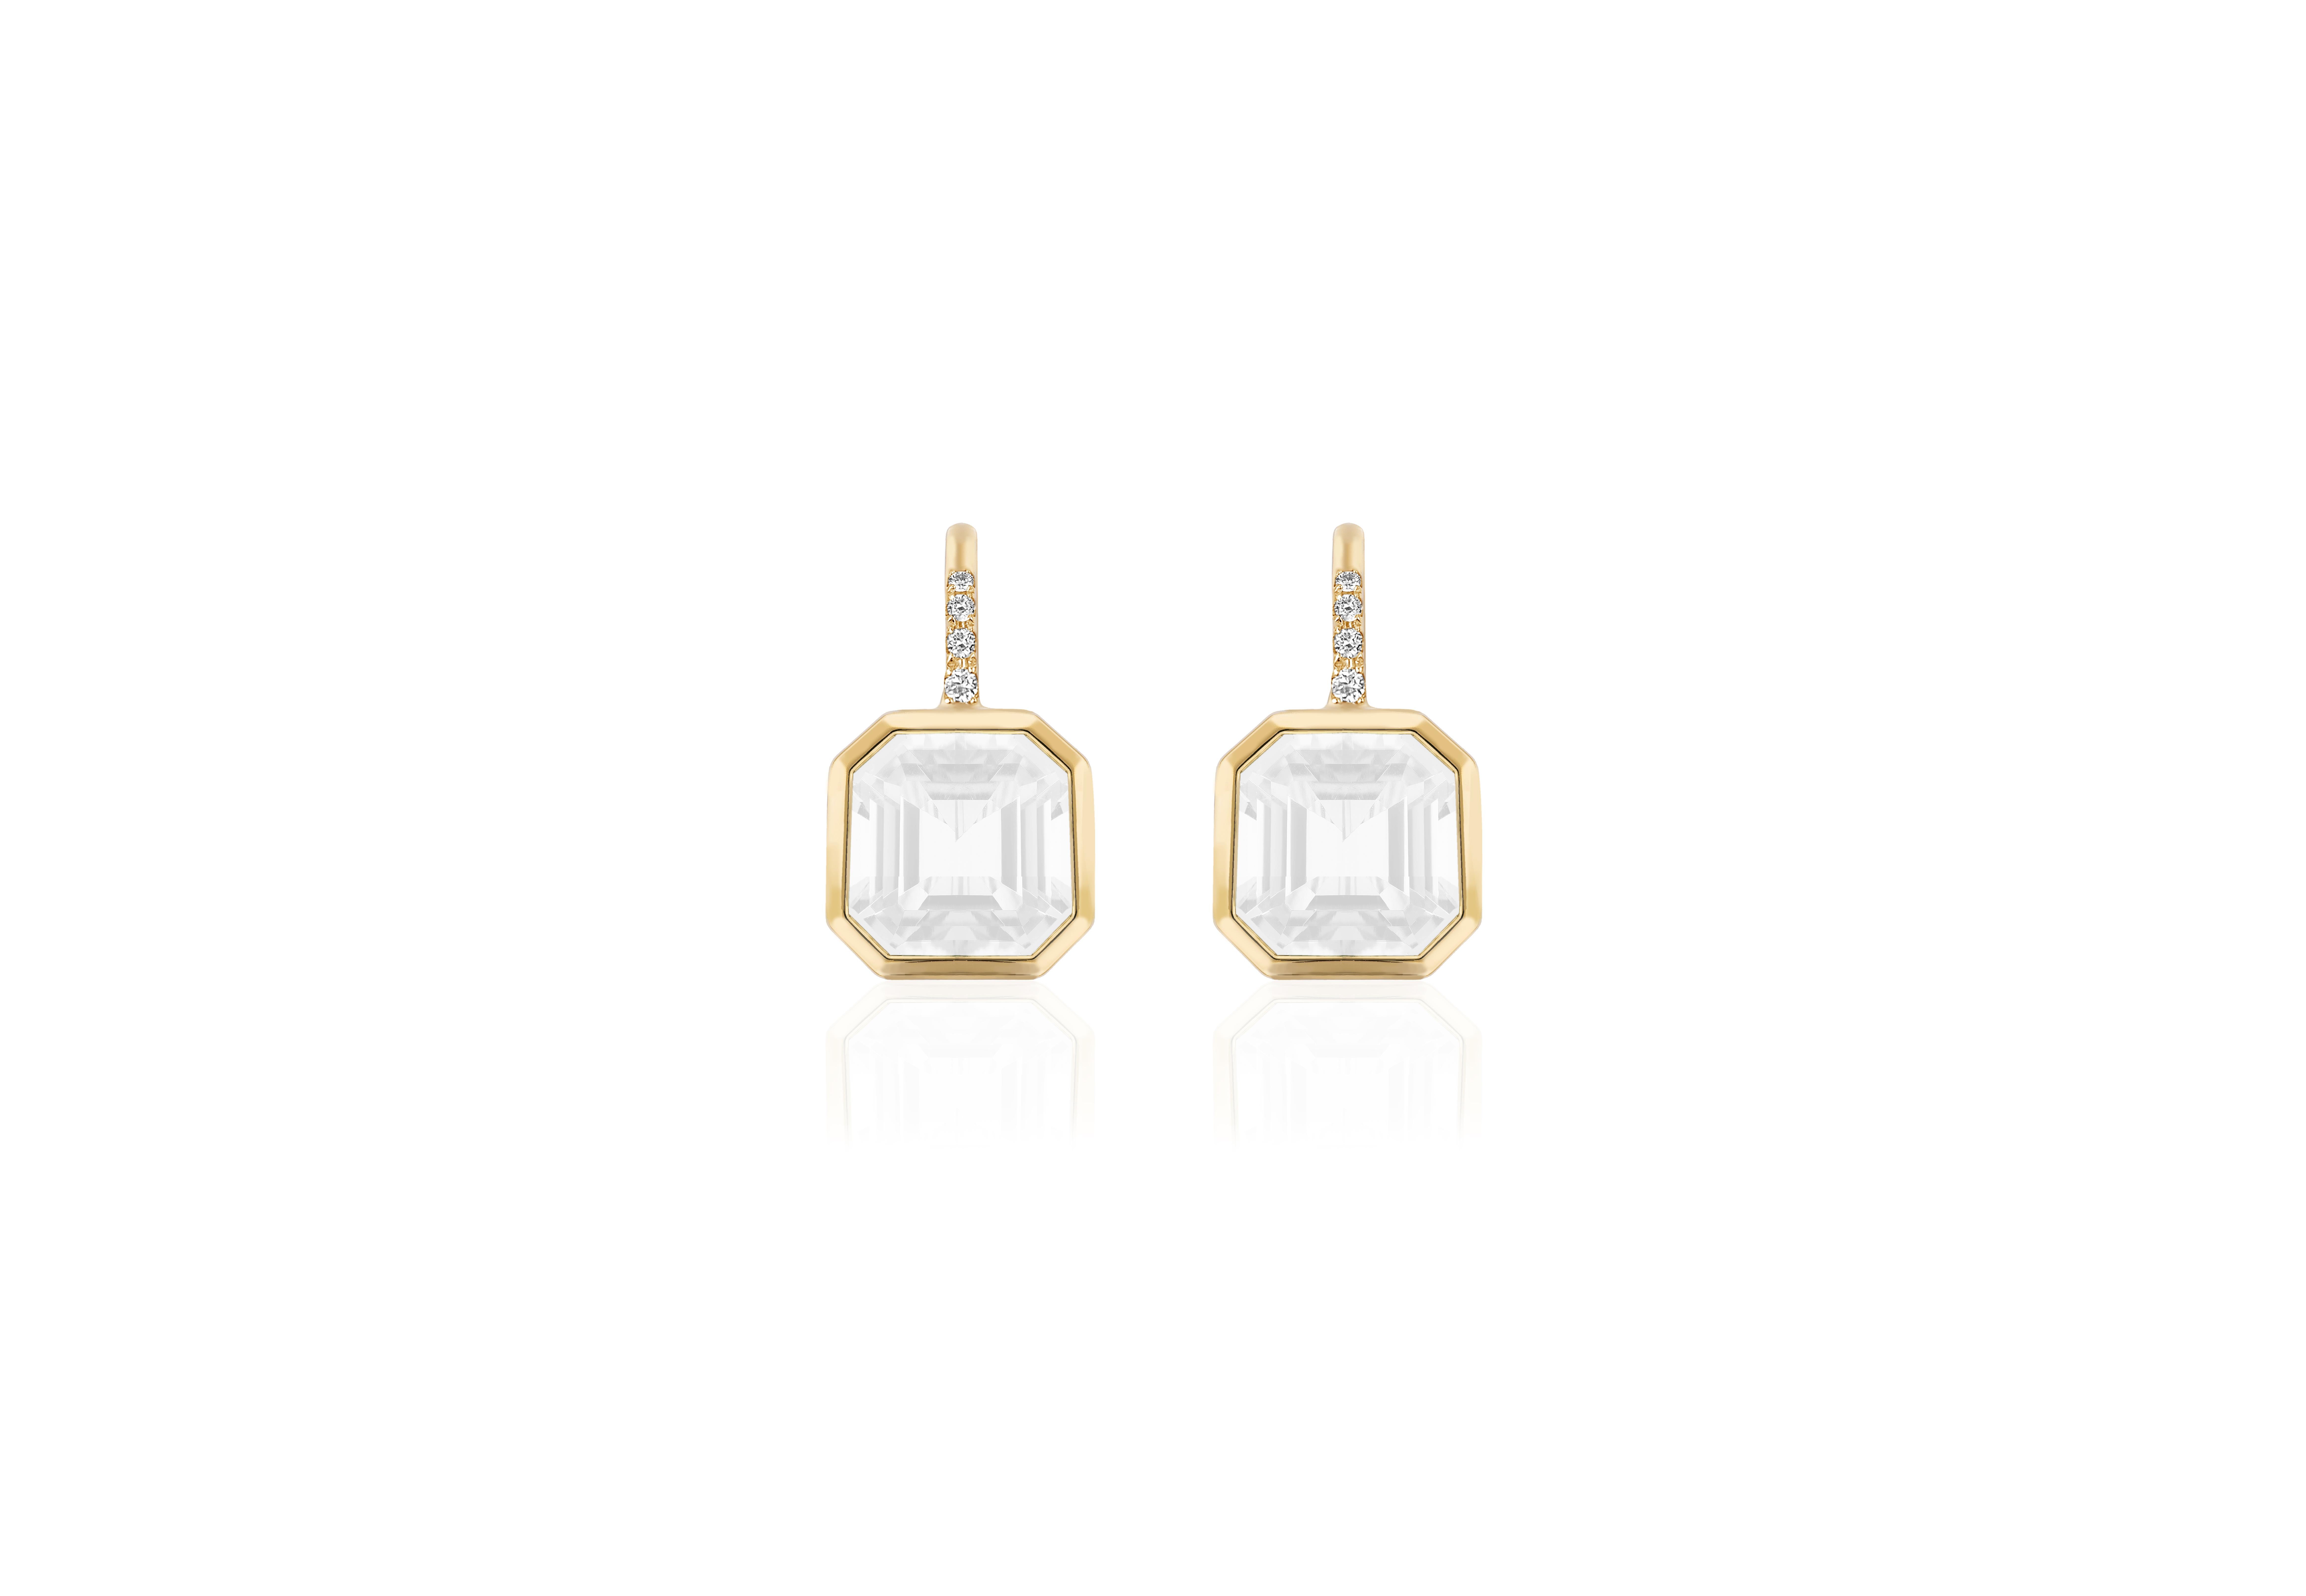 These beautiful earrings in a 9 x 9 mm Asscher cut, which is a  blend of the princess and emerald cuts with X-shaped facets from its corners to its center culet, are made in Moon Quartz which is from the Quartz family. They are set on wire with 4